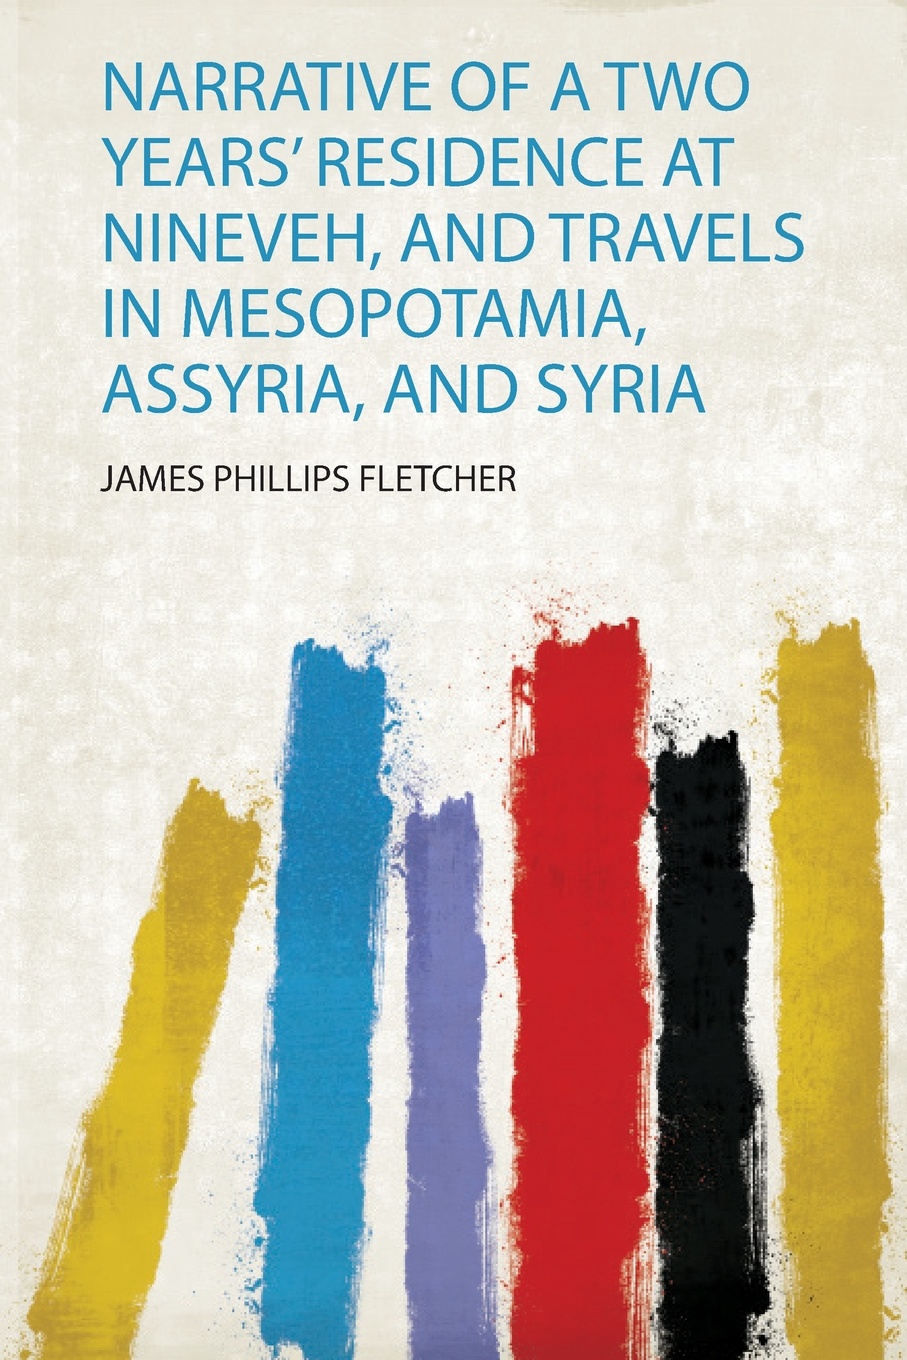 Narrative of a Two Years` Residence at Nineveh, and Travels in Mesopotamia, Assyria, and Syria